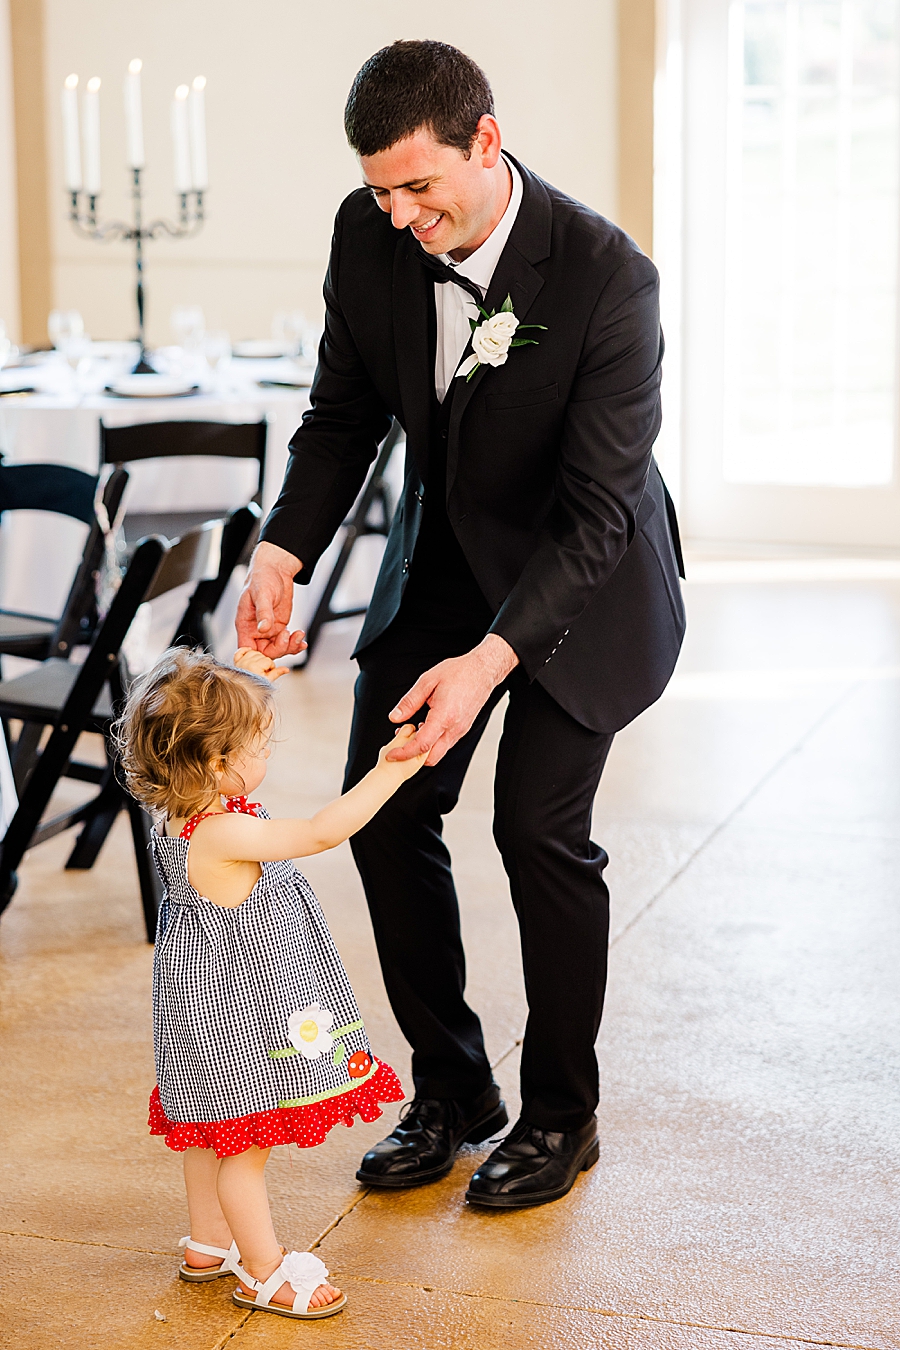 dad dancing with little girl